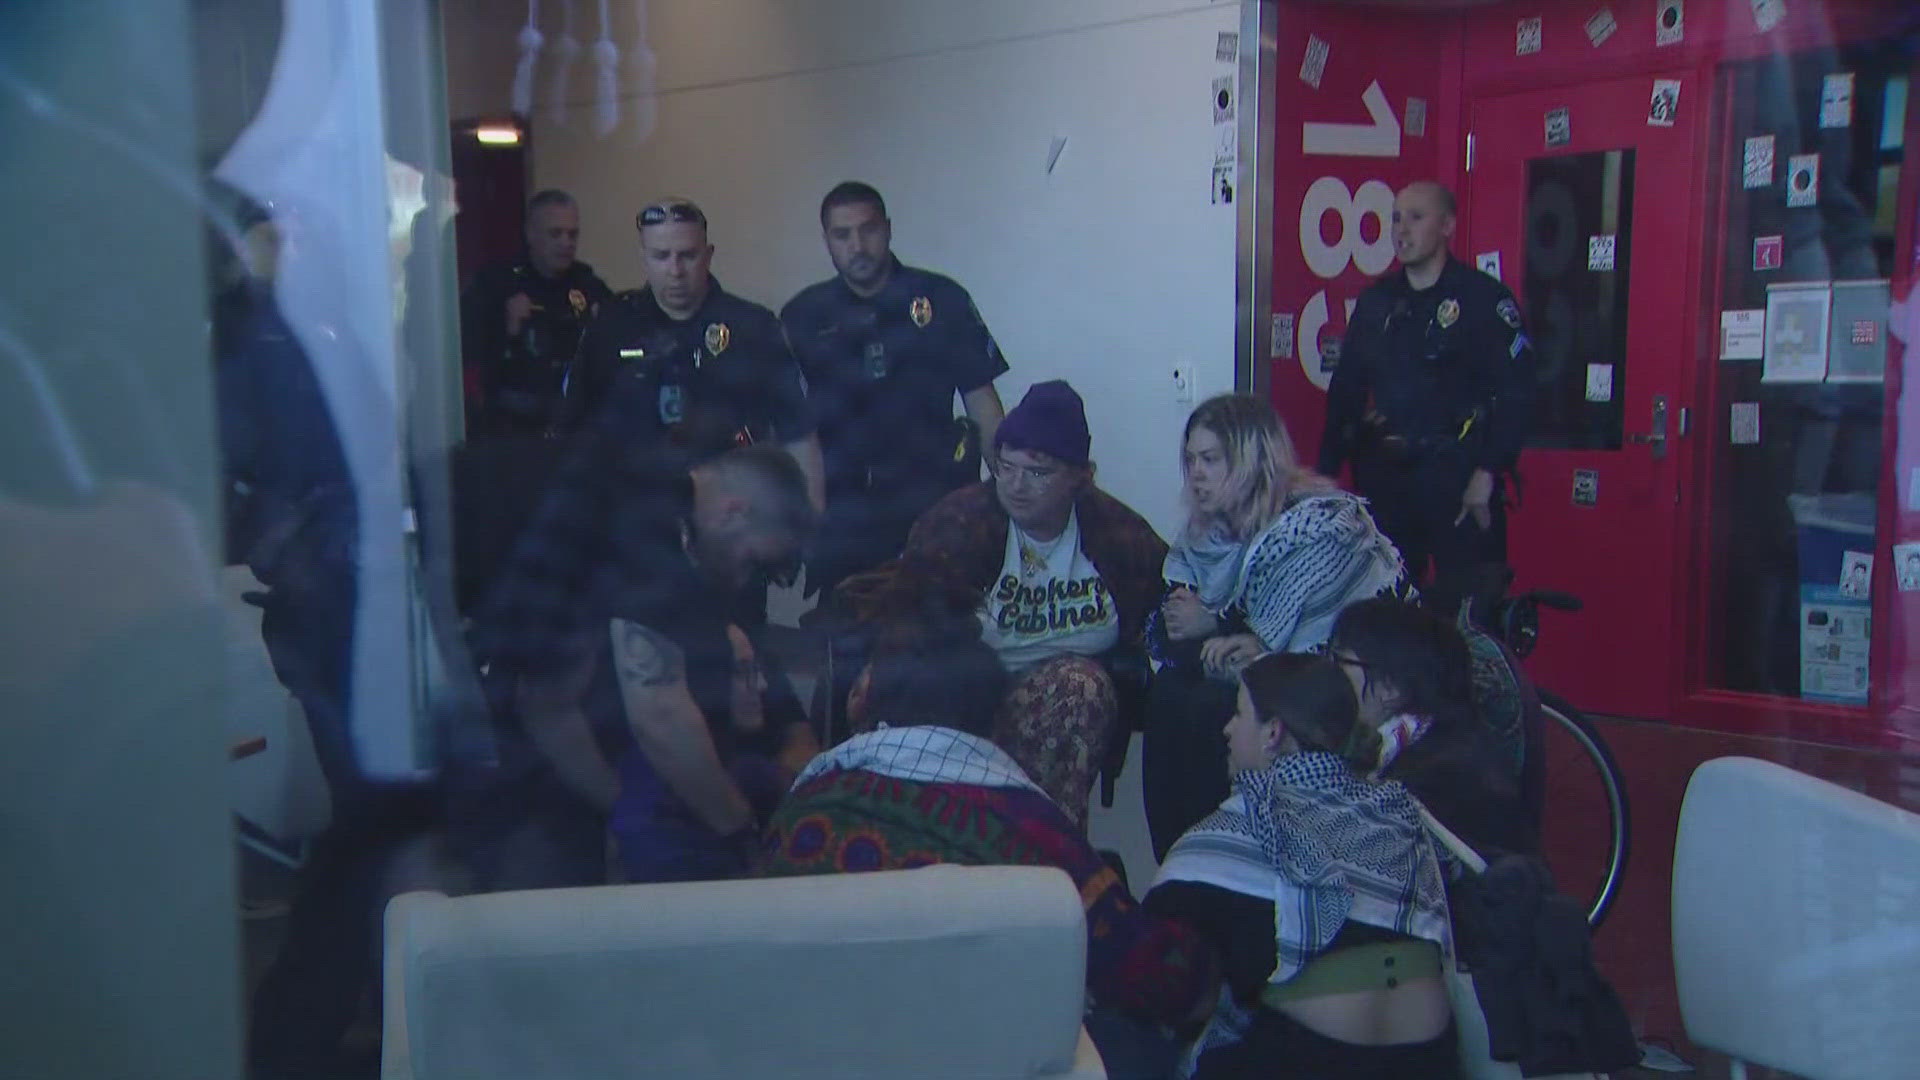 Several protesters were detained and given tickets for trespassing in a building at Auraria Campus Tuesday evening.